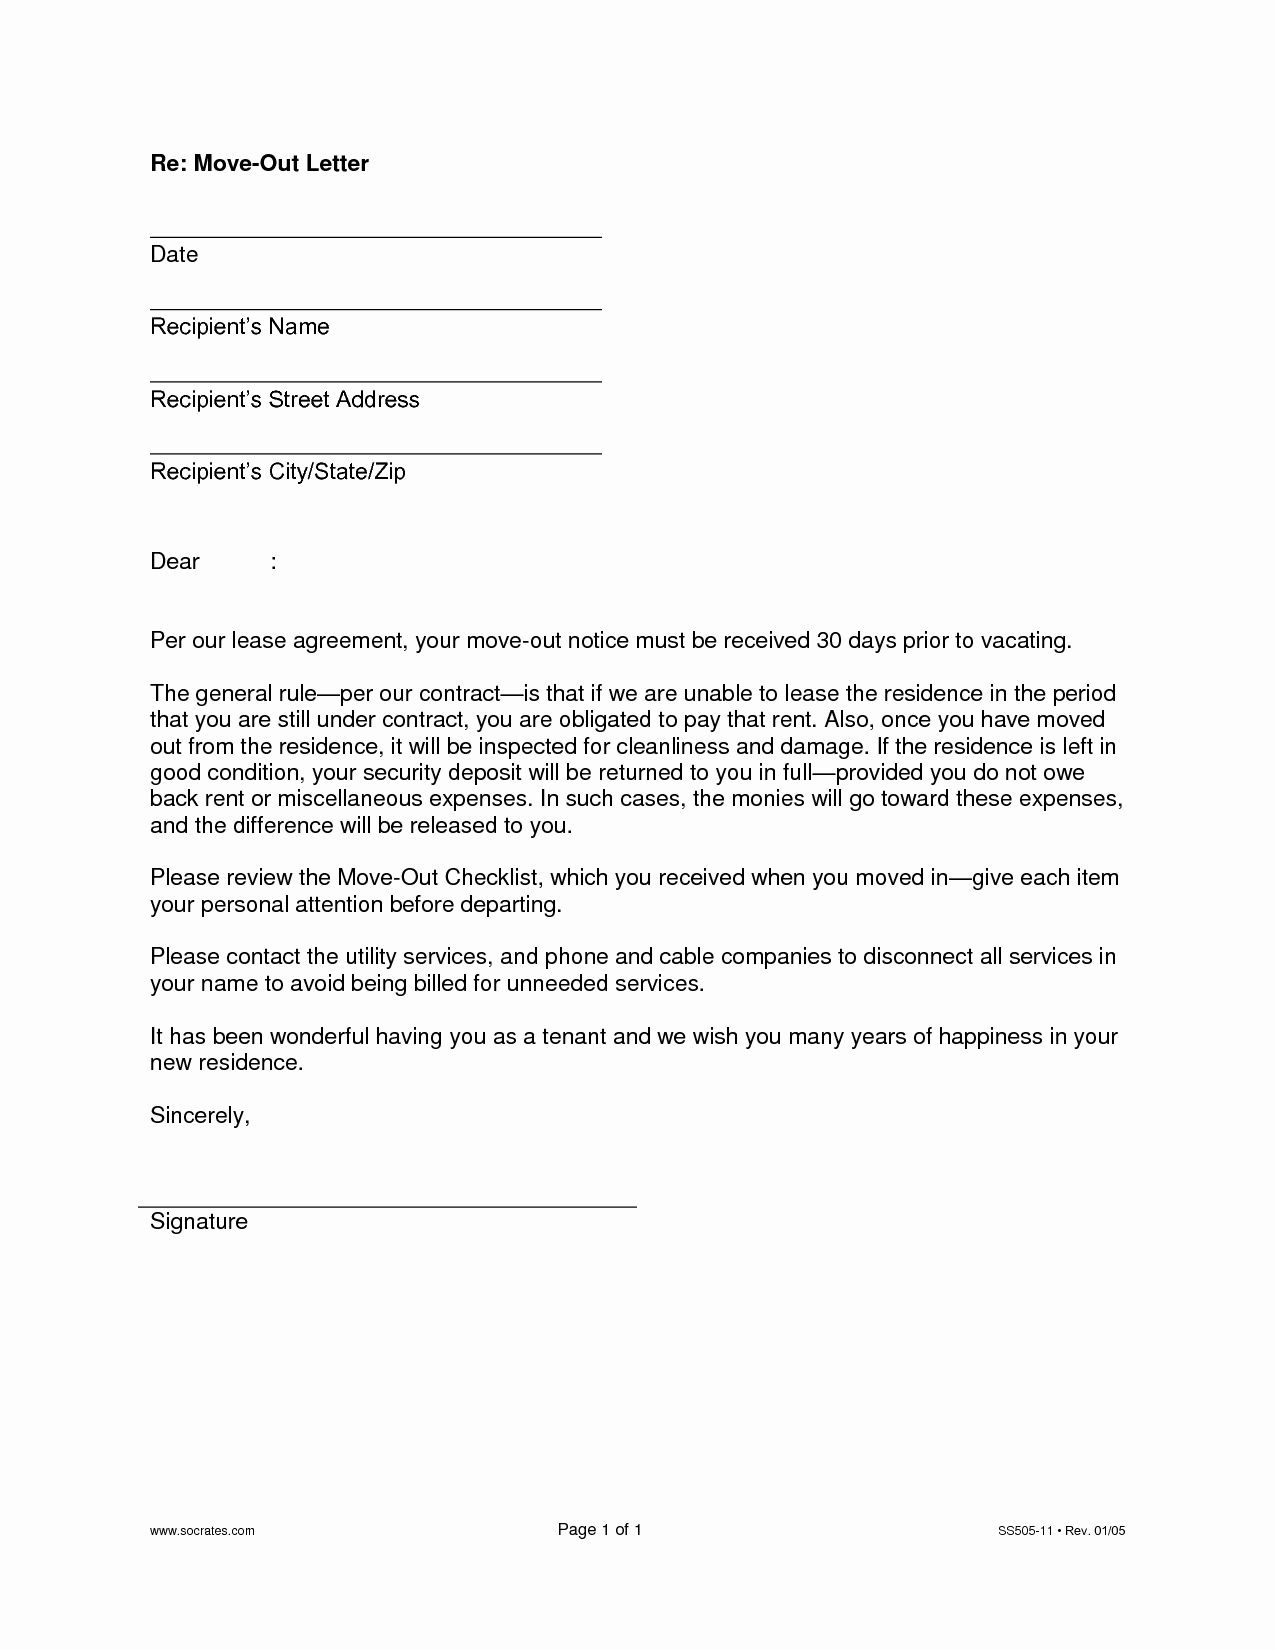 Landlord to Tenant Sample Letters Best Of Best S Of Letter to Landlord Moving Out Letter From